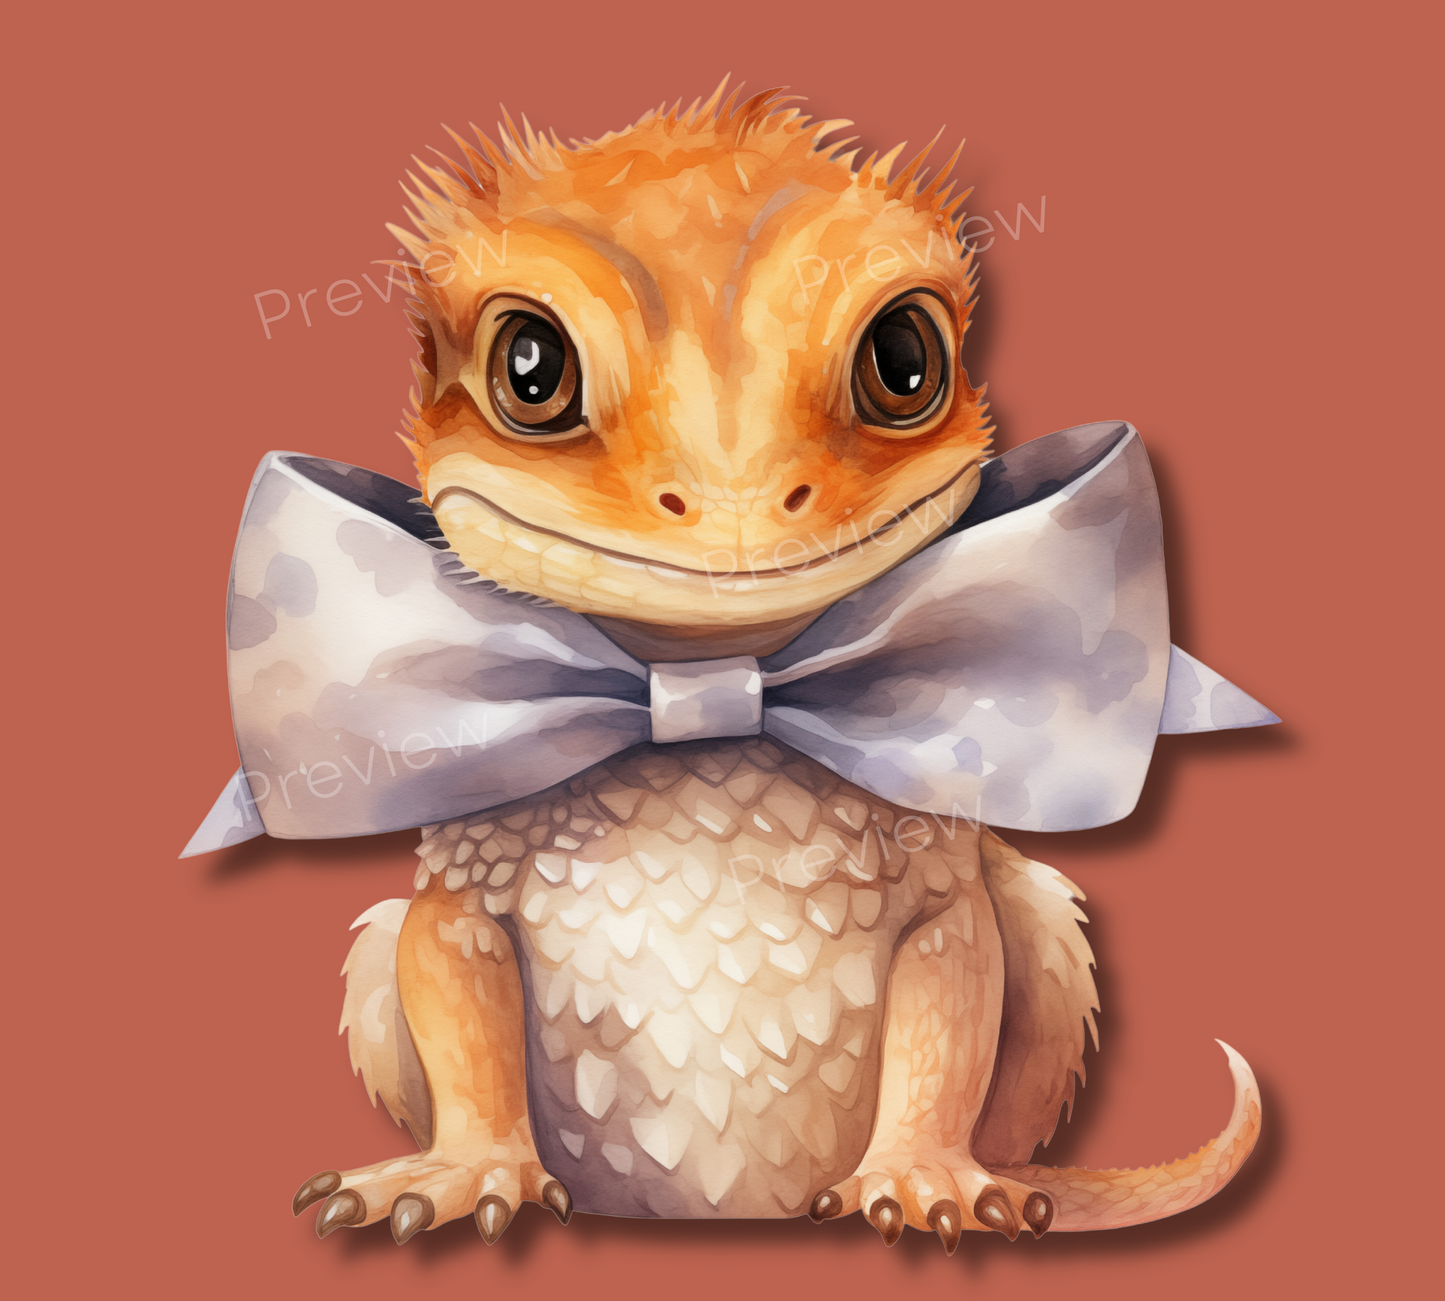 Baby Bearded Dragon PNGs | Lizard Love | Cute Beardies with Bows Clip art | Watercolor | Jack & Jill  | Valentines Clipart  | Commercial Use